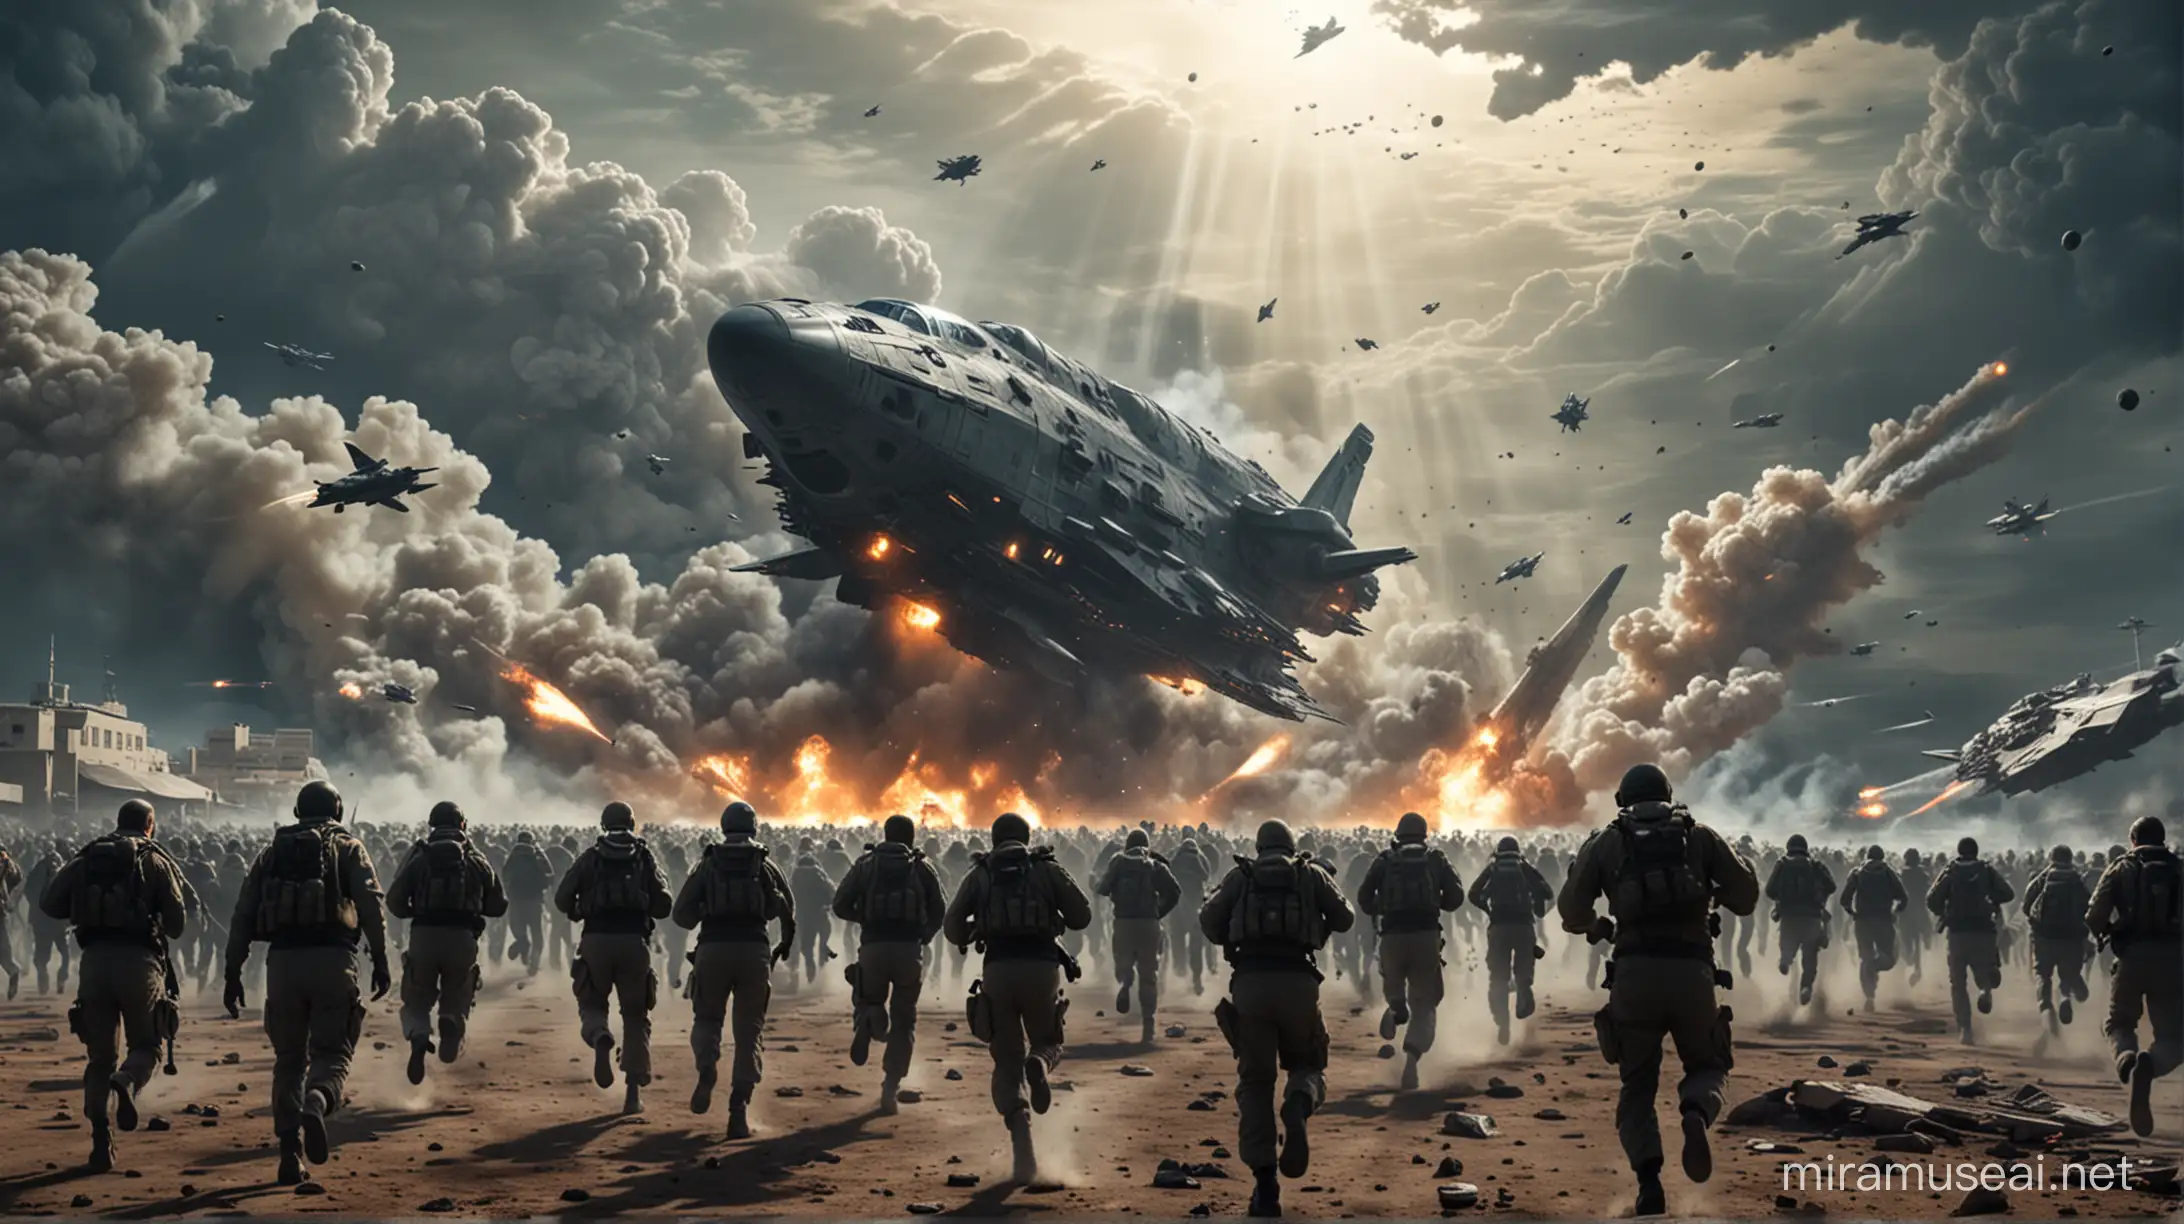 world war 3 where people are running toward a space ship which is leaving the earth
